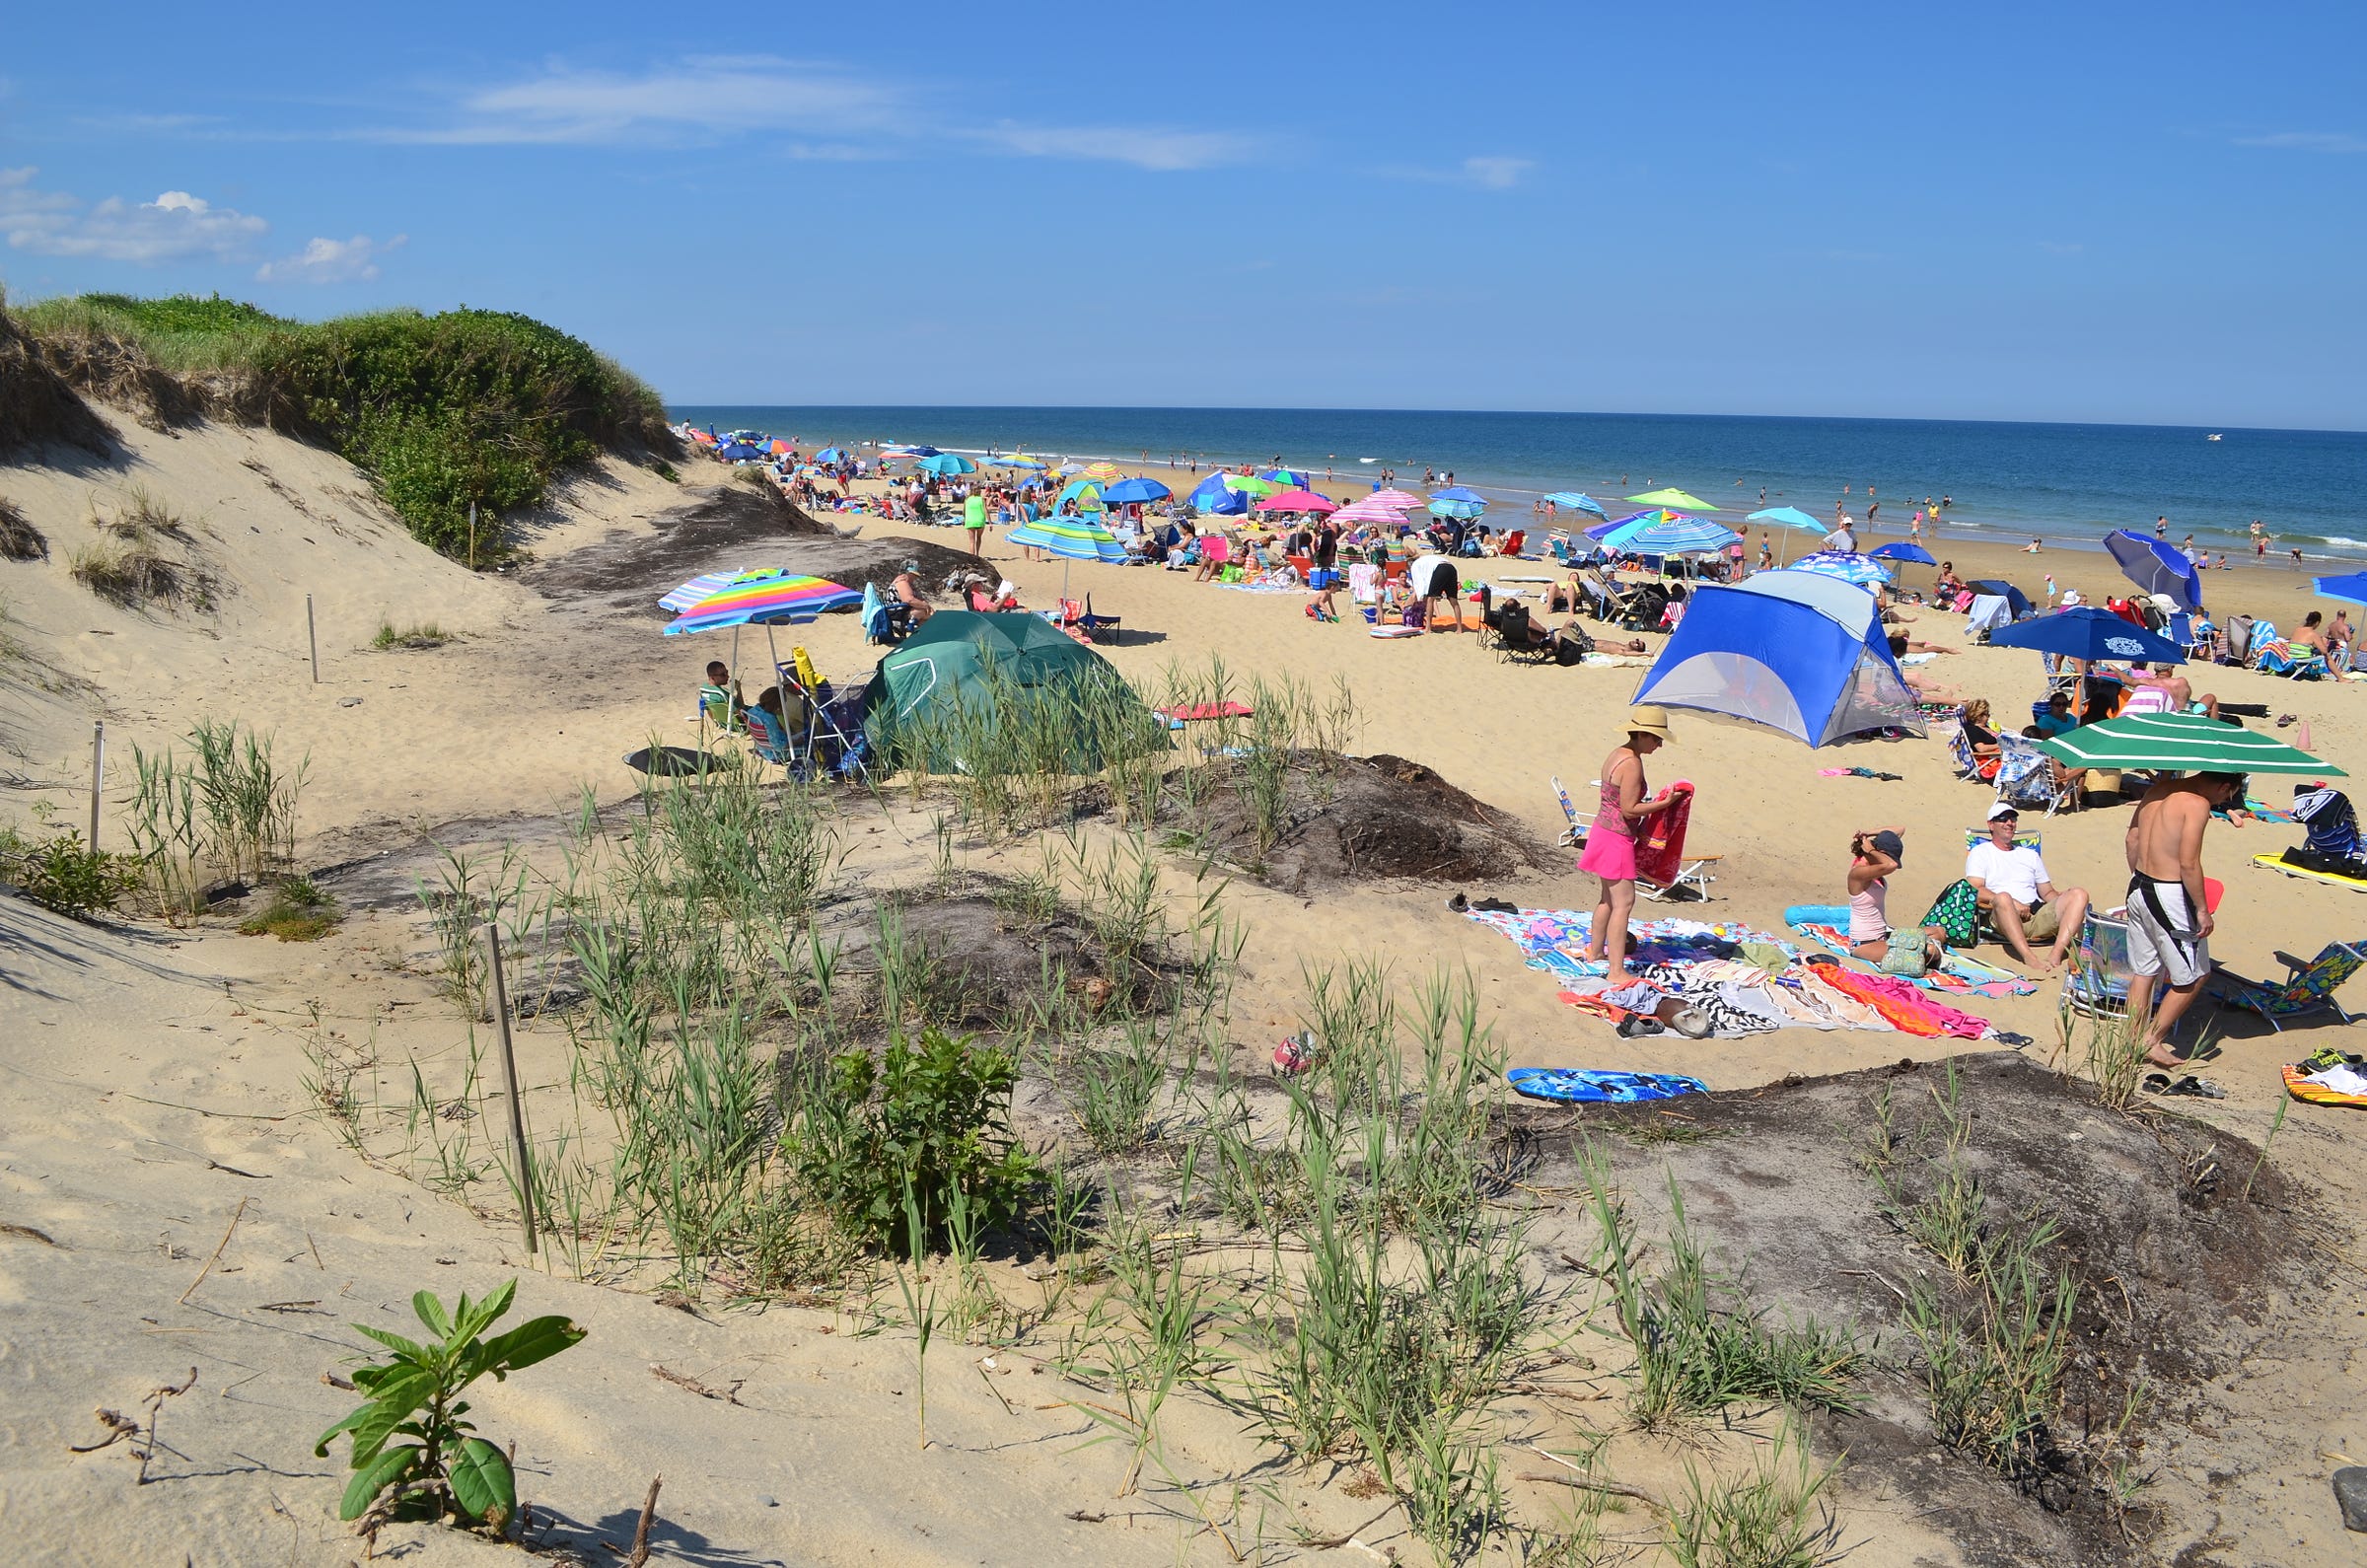 Looking down from a high sandy bluff to a summer ocean beach crowded with people.